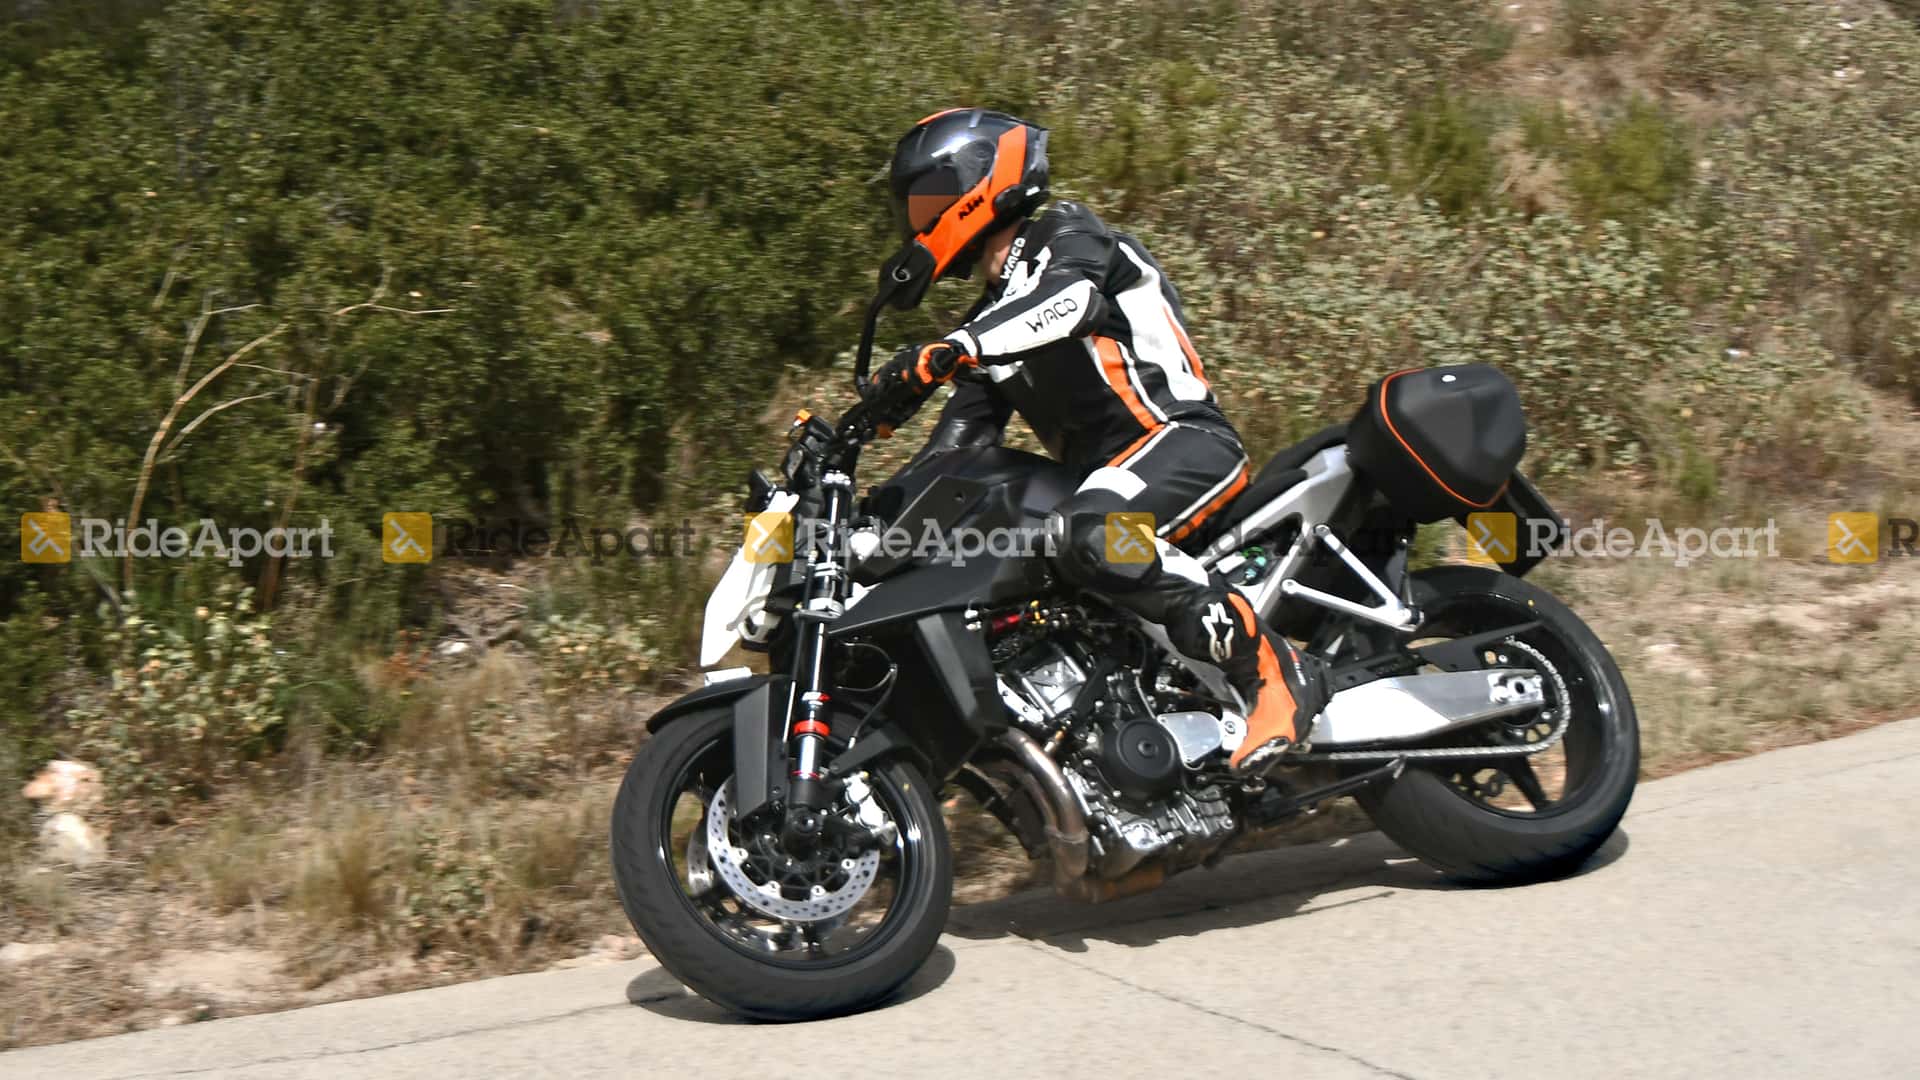 New KTM Duke 990 Spotted Testing - Coming To India? - pic